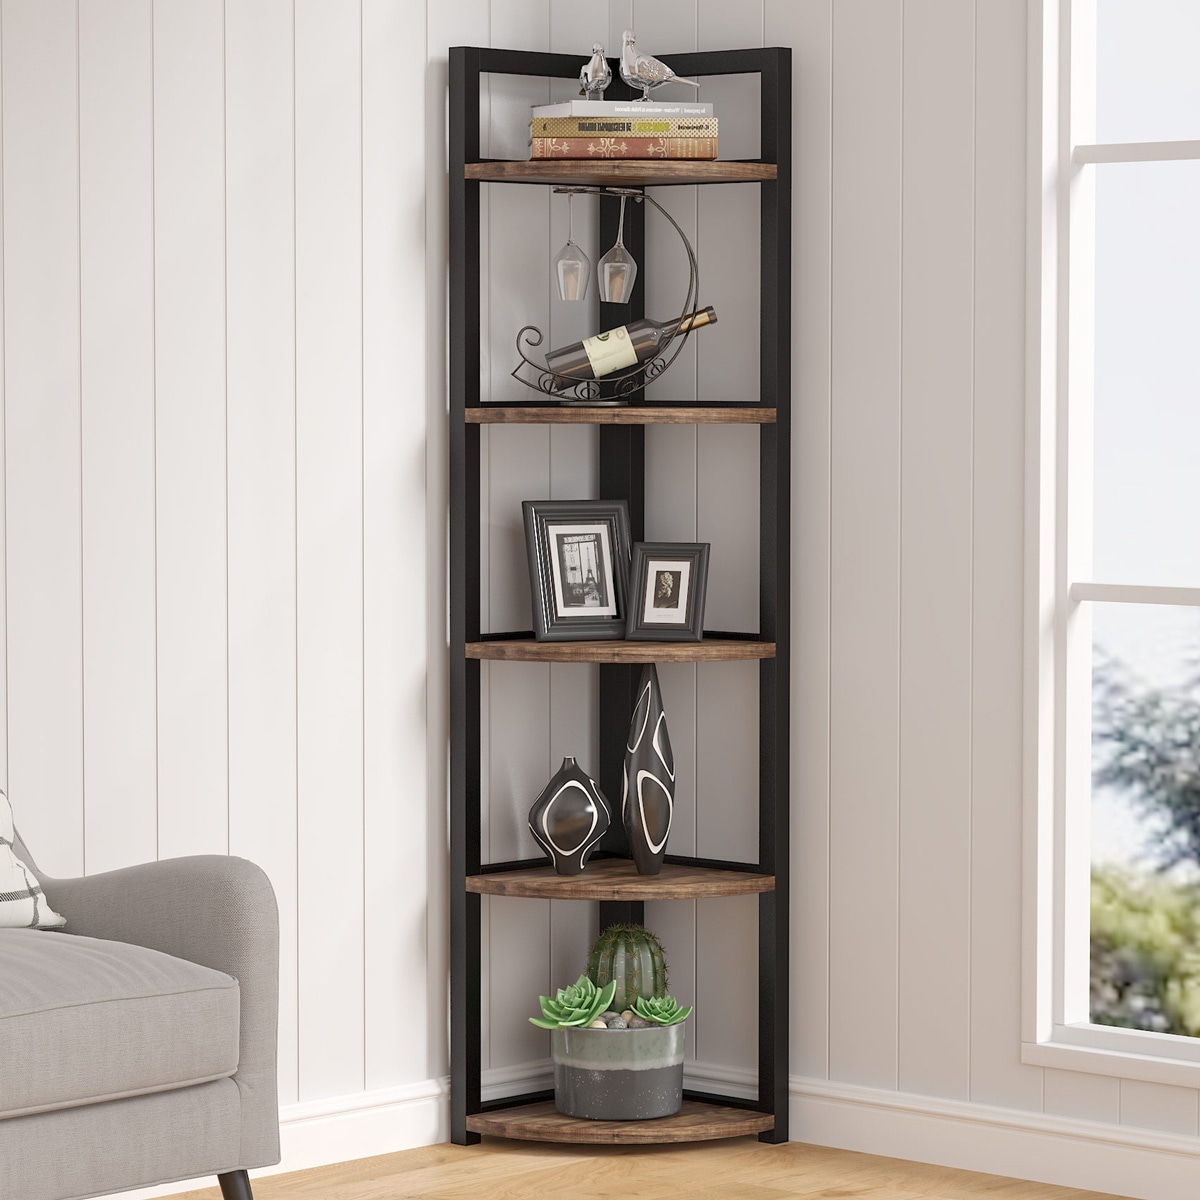 https://ak1.ostkcdn.com/images/products/is/images/direct/239b4abe50885b47799d38c19f83dd54b56634fa/5-Tier-Corner-Shelves%2C-Corner-Bookshelf-and-Bookcase-Indoor-Plant-Stand.jpg